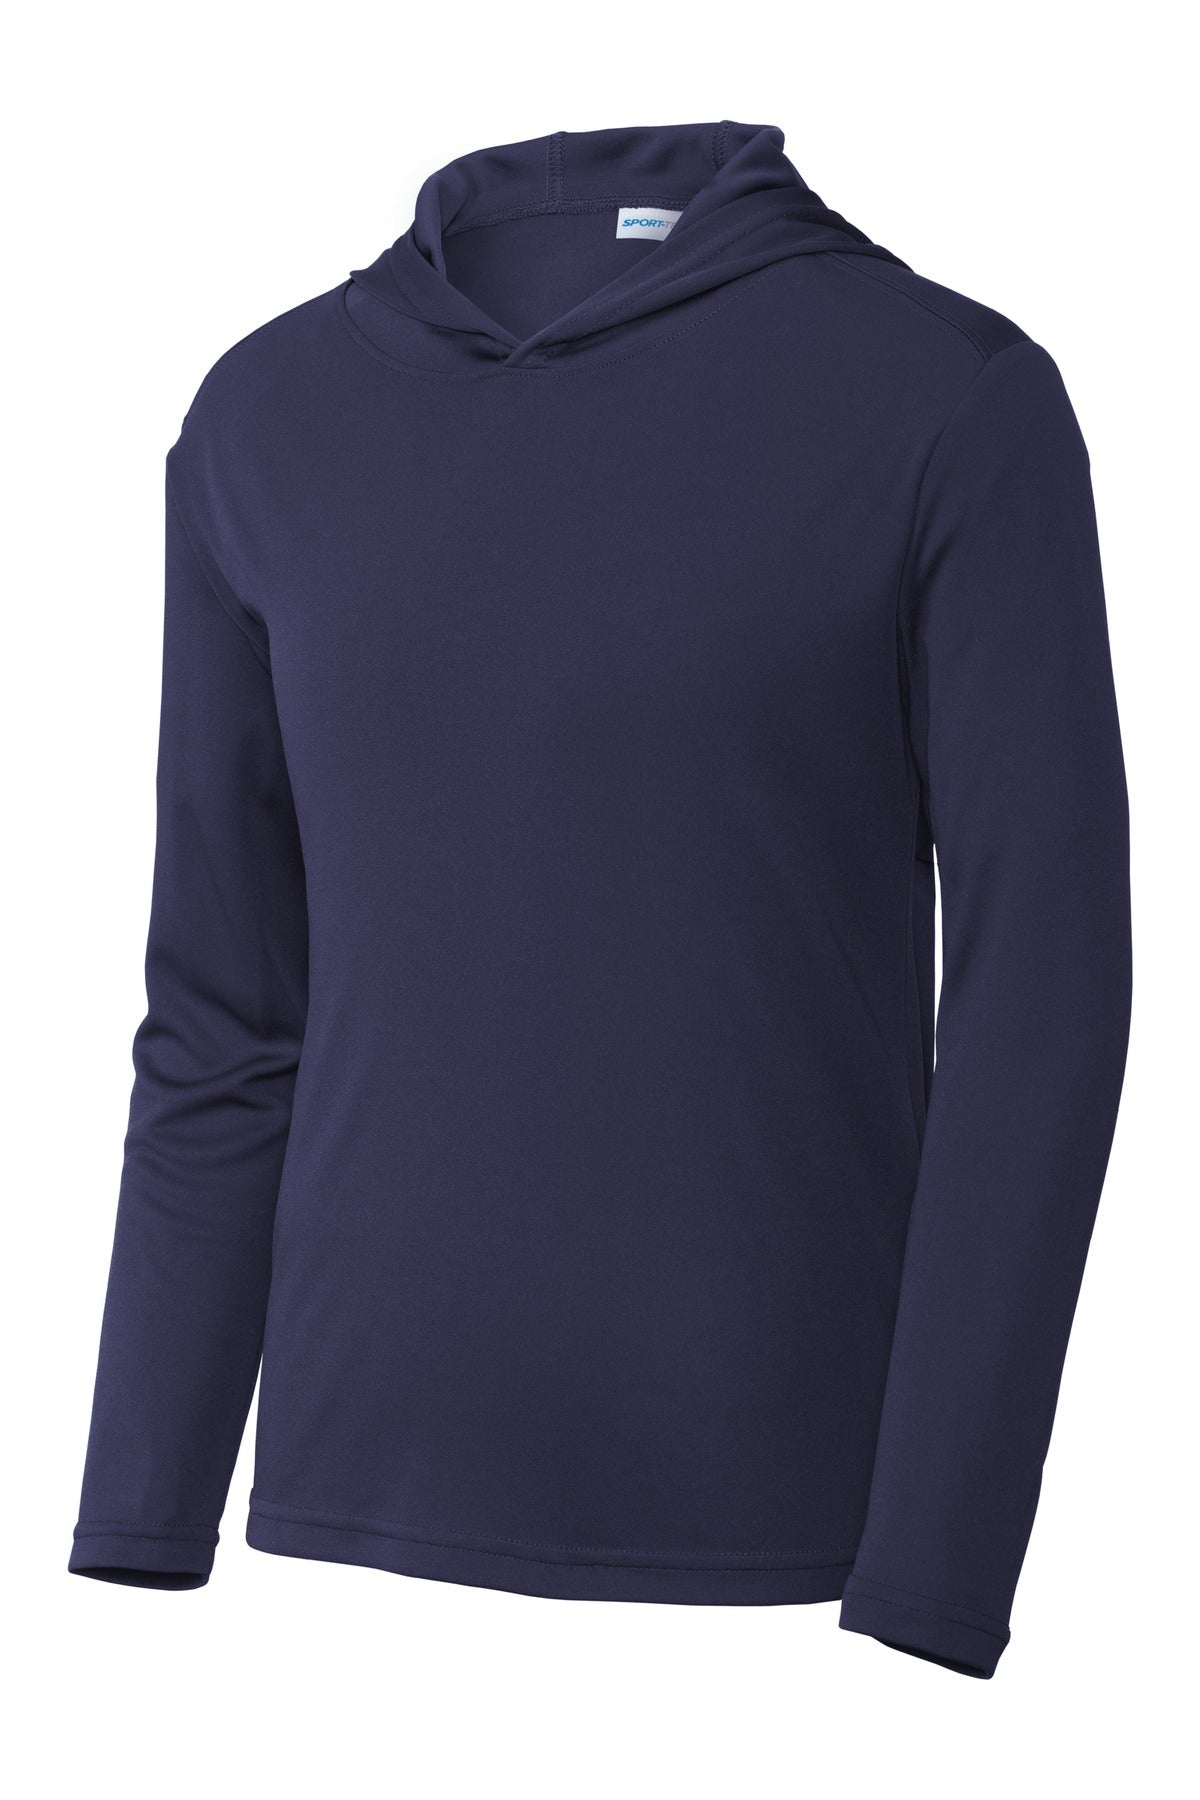 Sport-Tek ® Youth PosiCharge ® Competitor ™ Hooded Pullover. YST358